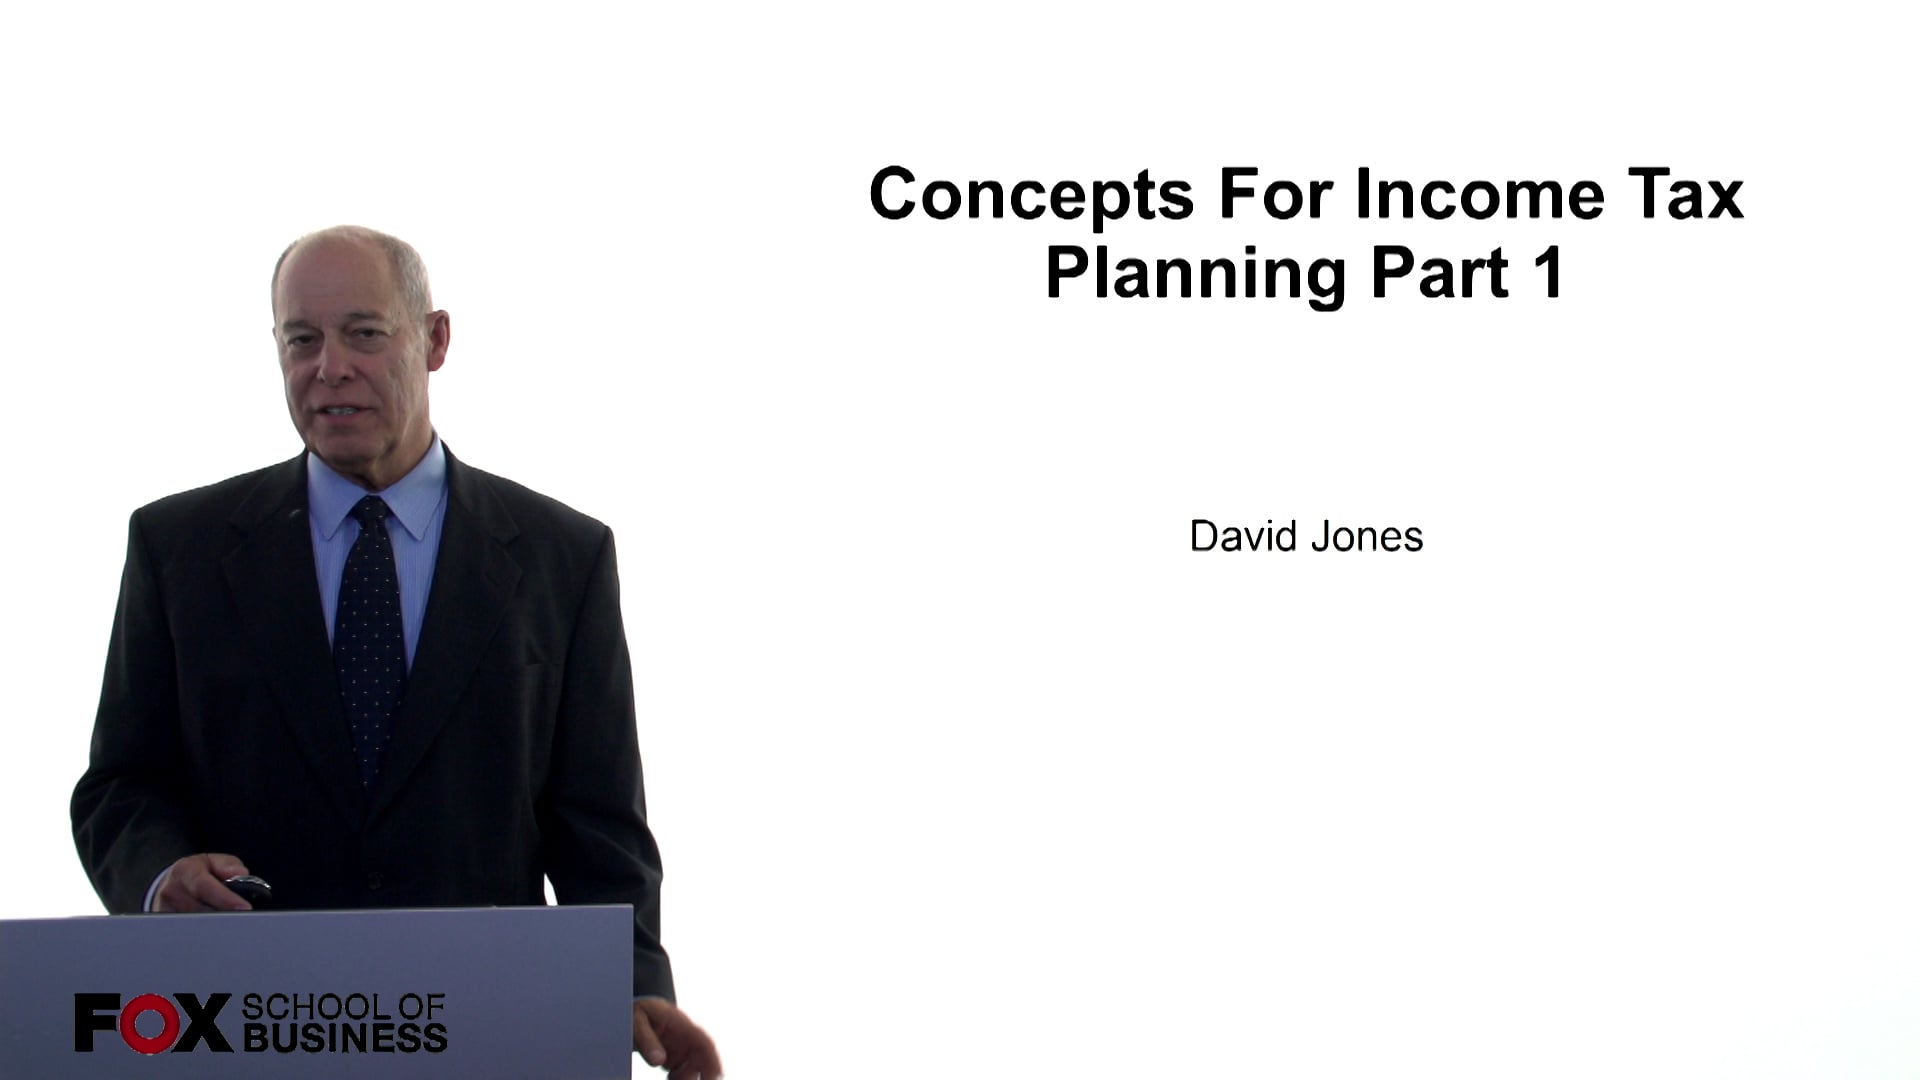 Concepts for Income Tax Planning Part 1